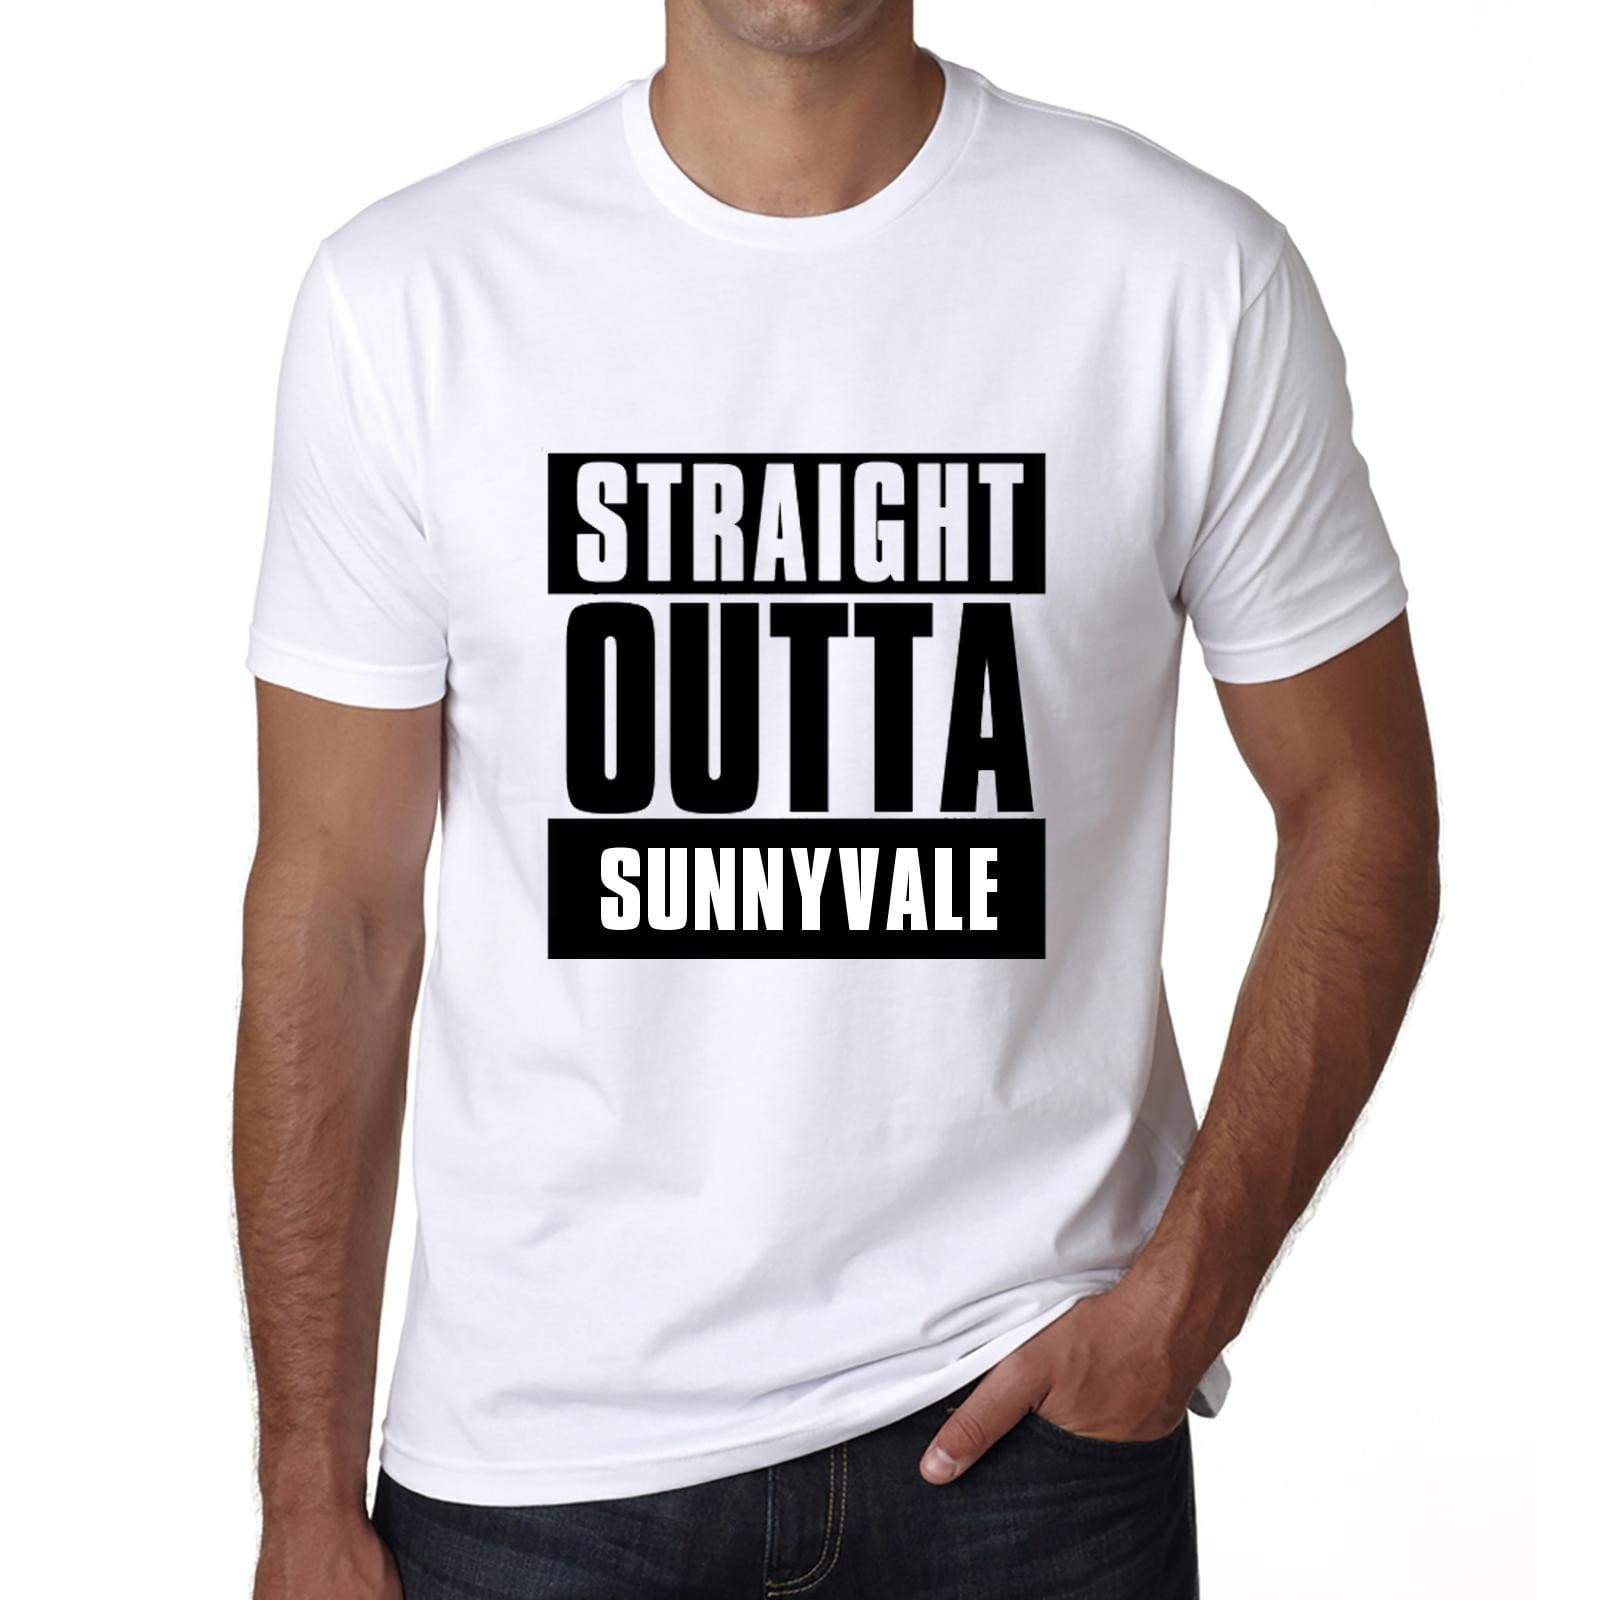 Straight Outta Sunnyvale Mens Short Sleeve Round Neck T-Shirt 00027 - White / S - Casual